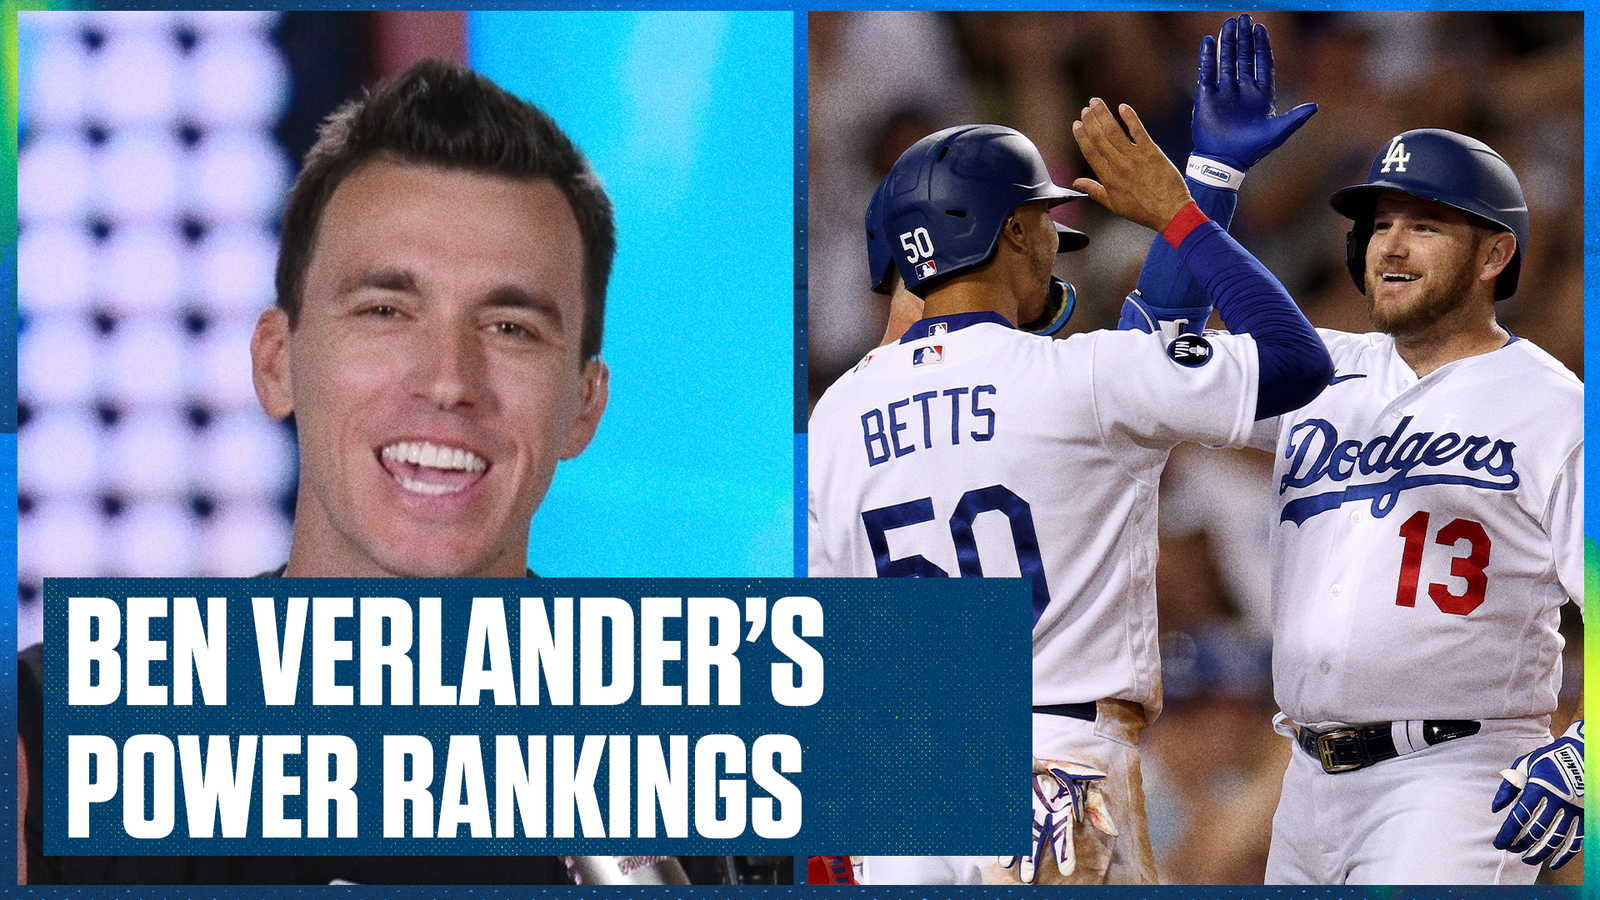 The Dodgers and Astros lead Ben's MLB Power Rankings